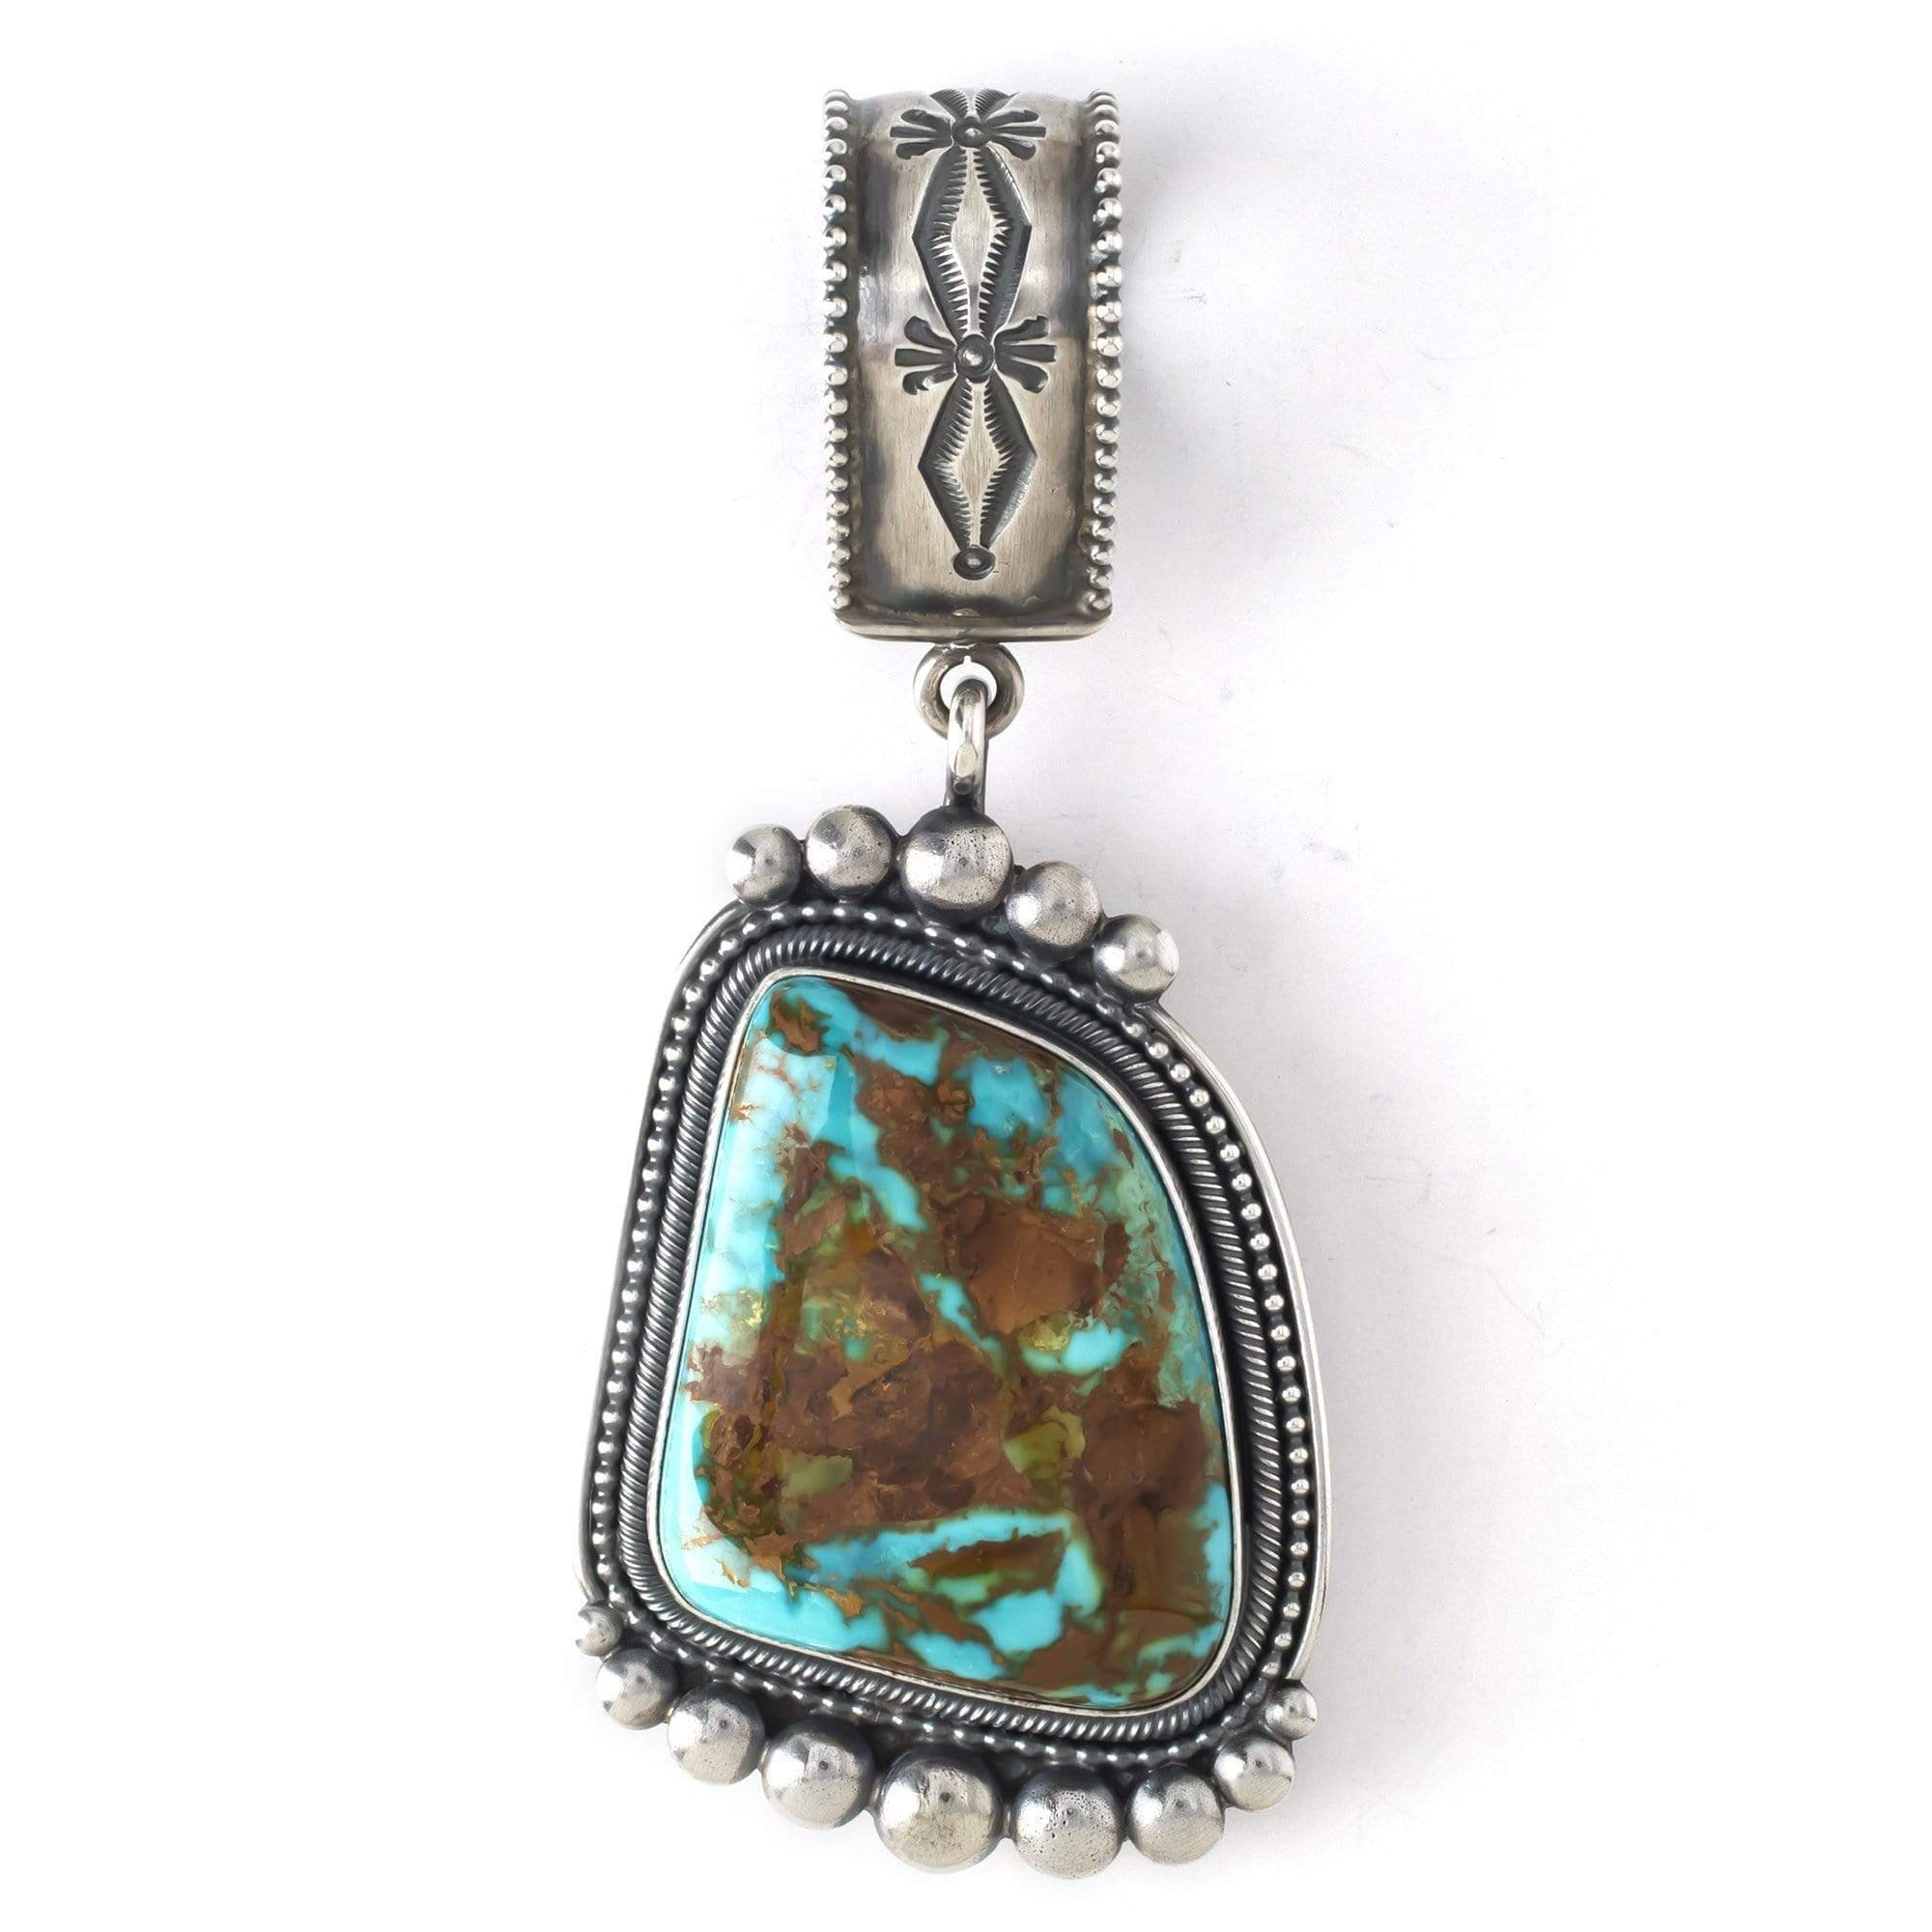 Kalifano Native American Jewelry Royston Turquoise Native American Made 925 Sterling Silver Pendant NAN3900.001